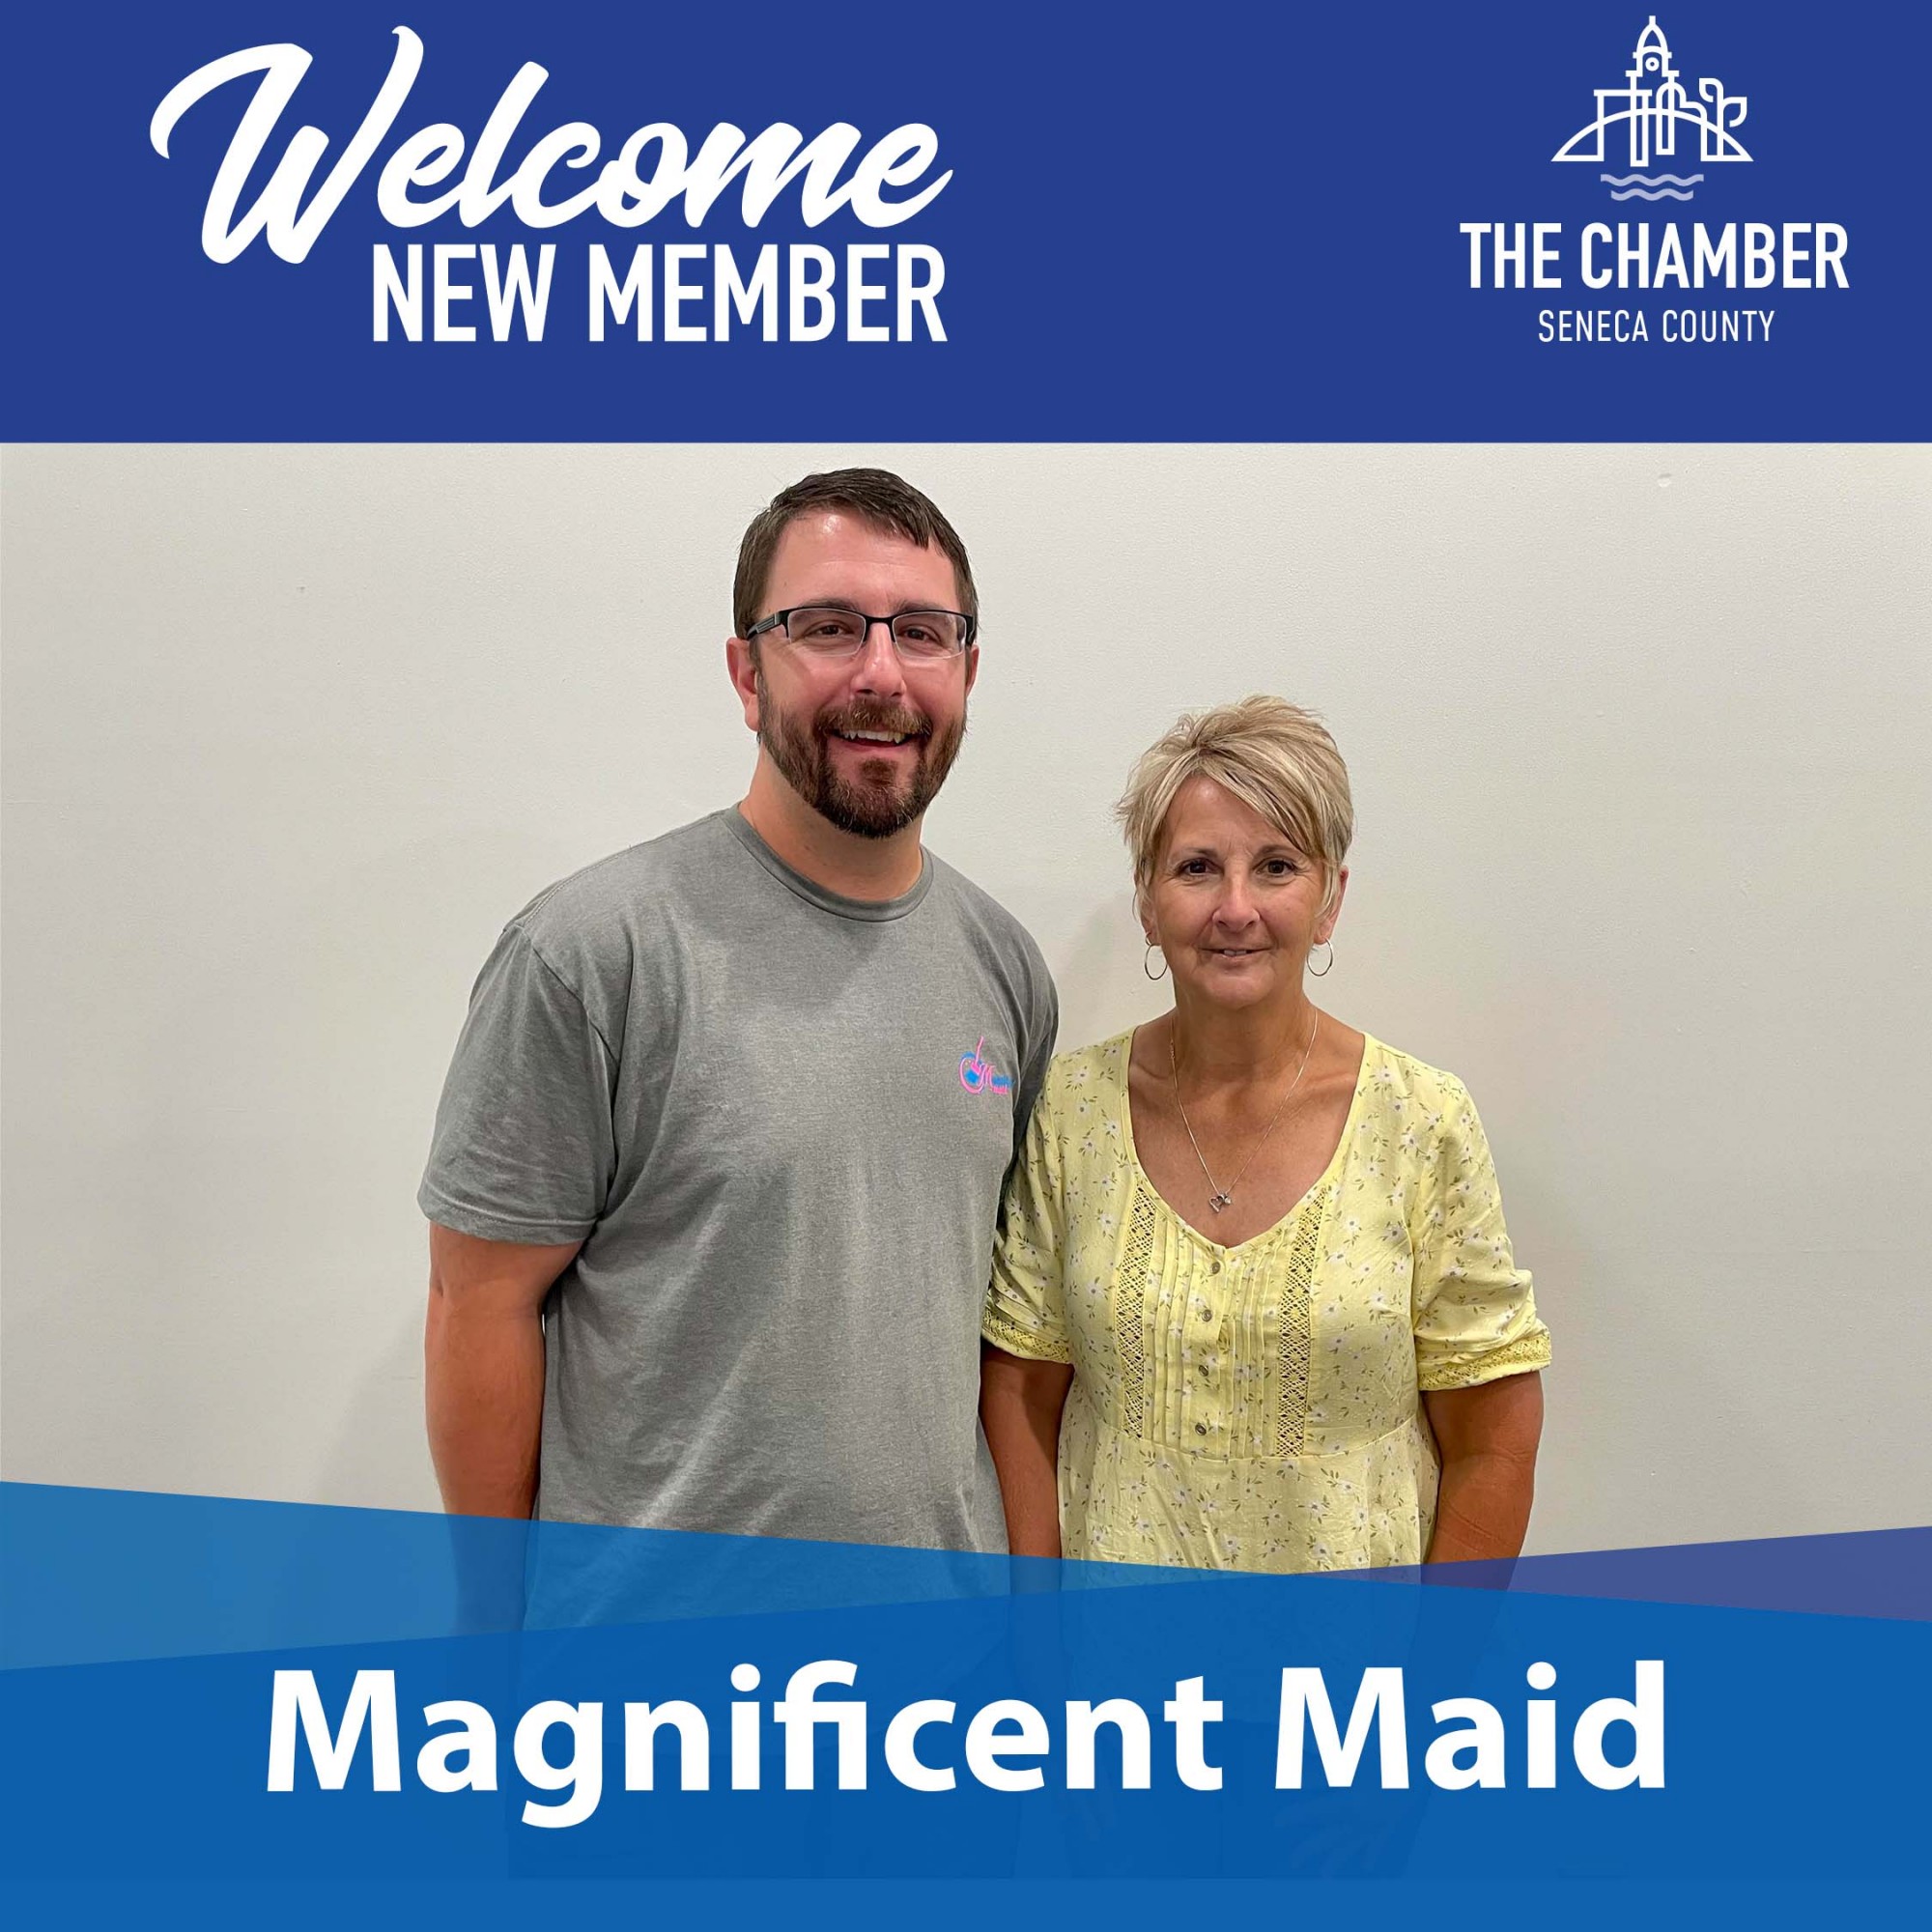 New Member: Magnificent Maid